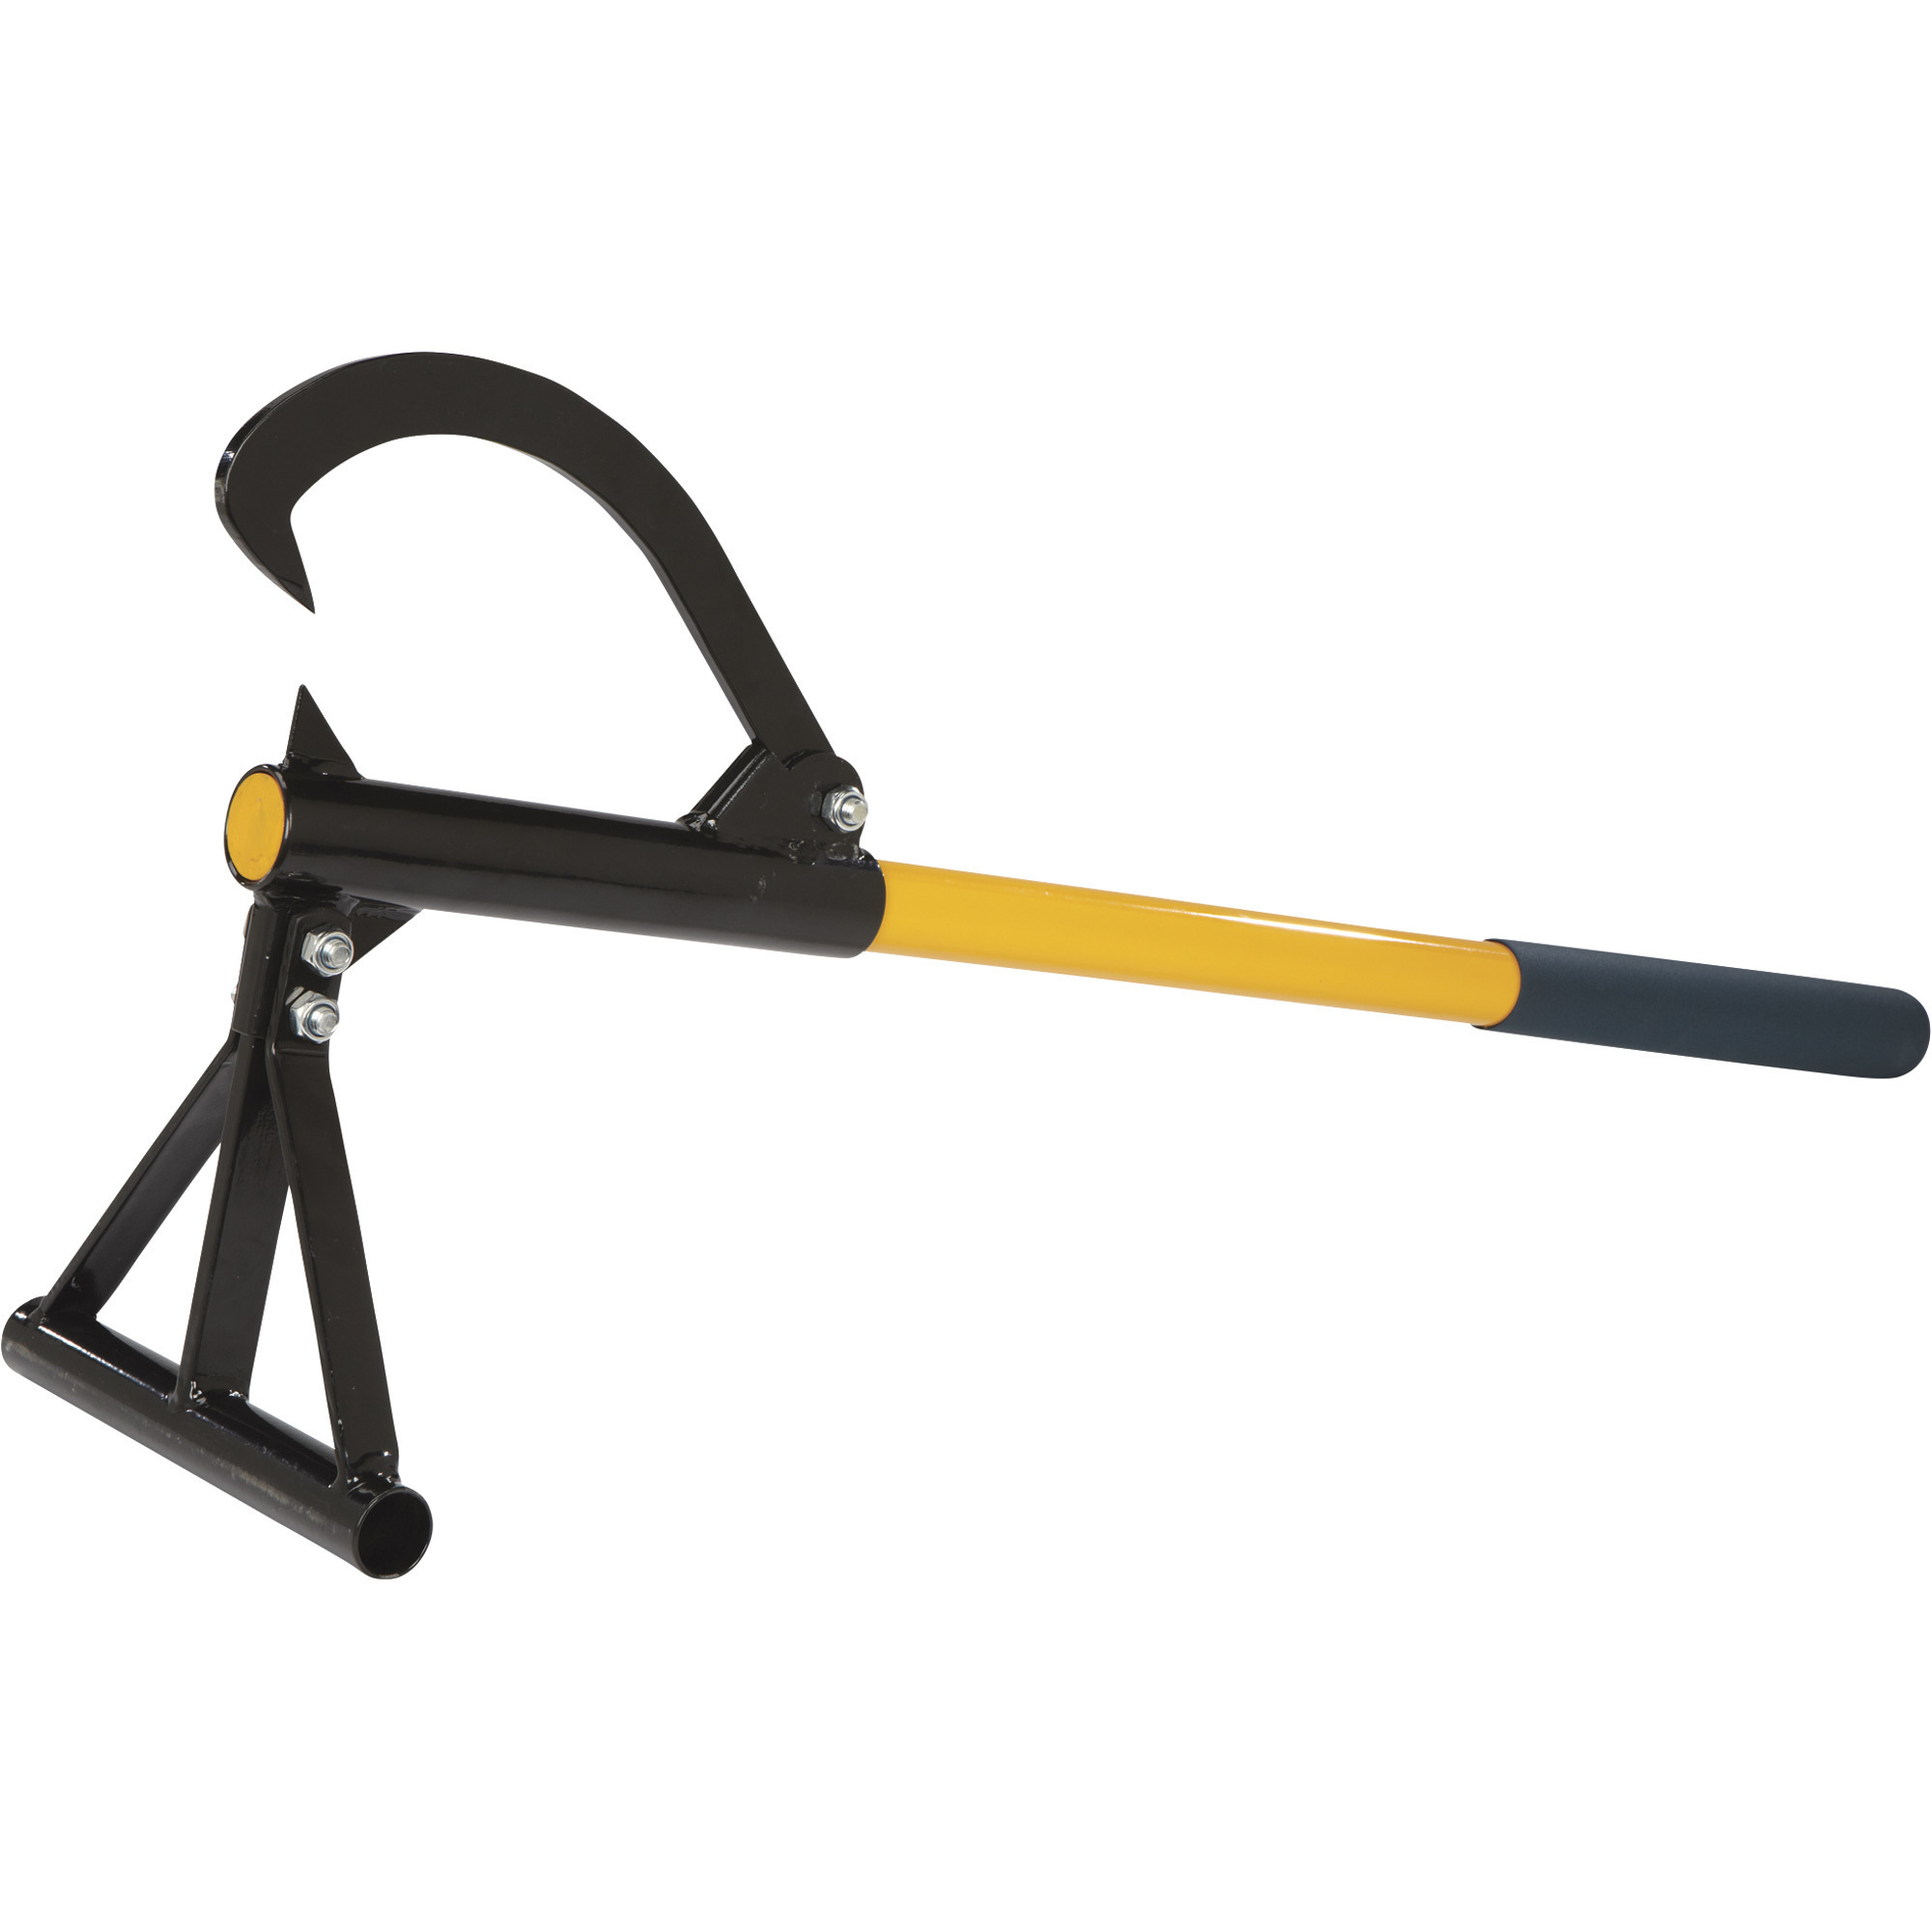 Roughneck Steel Core A-Frame Timberjack, 36Inch L